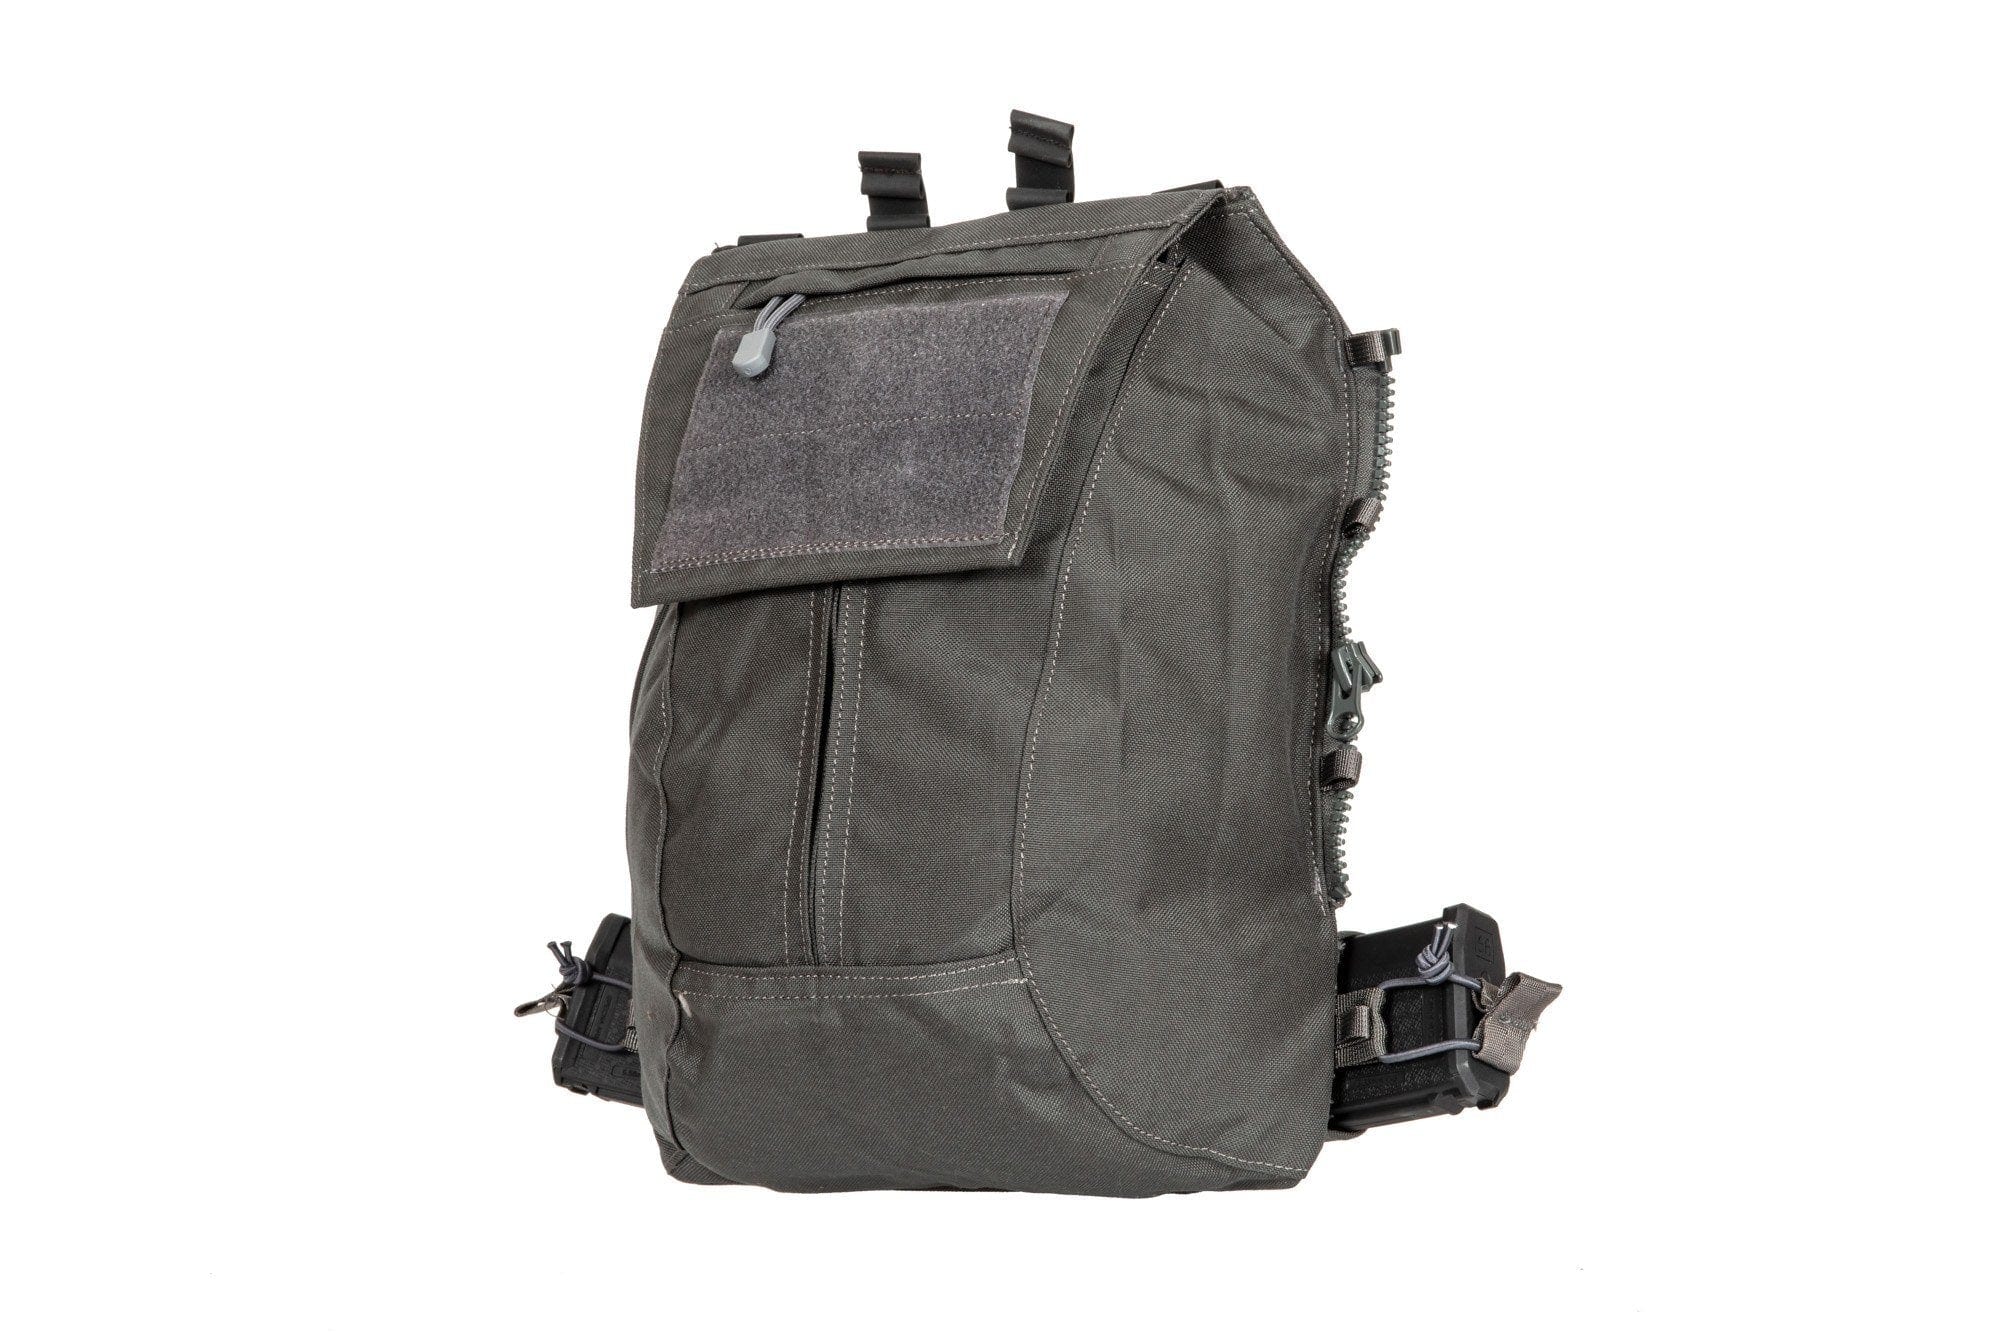 Tactical Backpack for Rush 2.0 Tactical Vest - Primal Grey